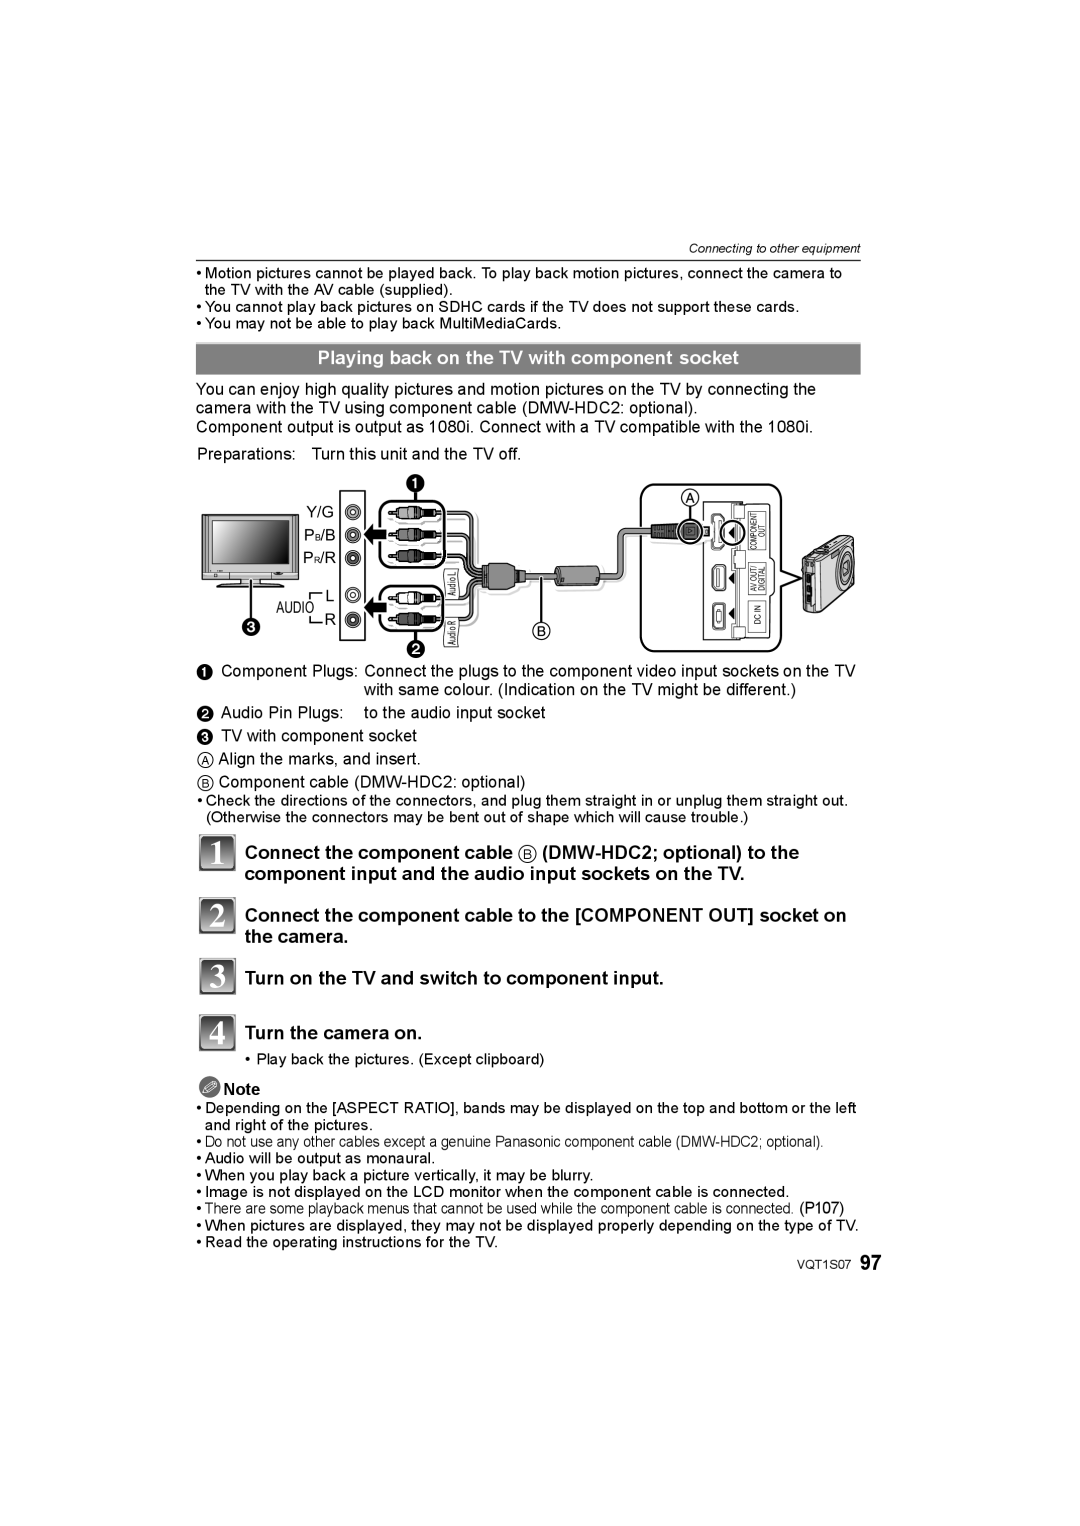 Panasonic DMC-FX38 operating instructions Playing back on the TV with component socket,  R 